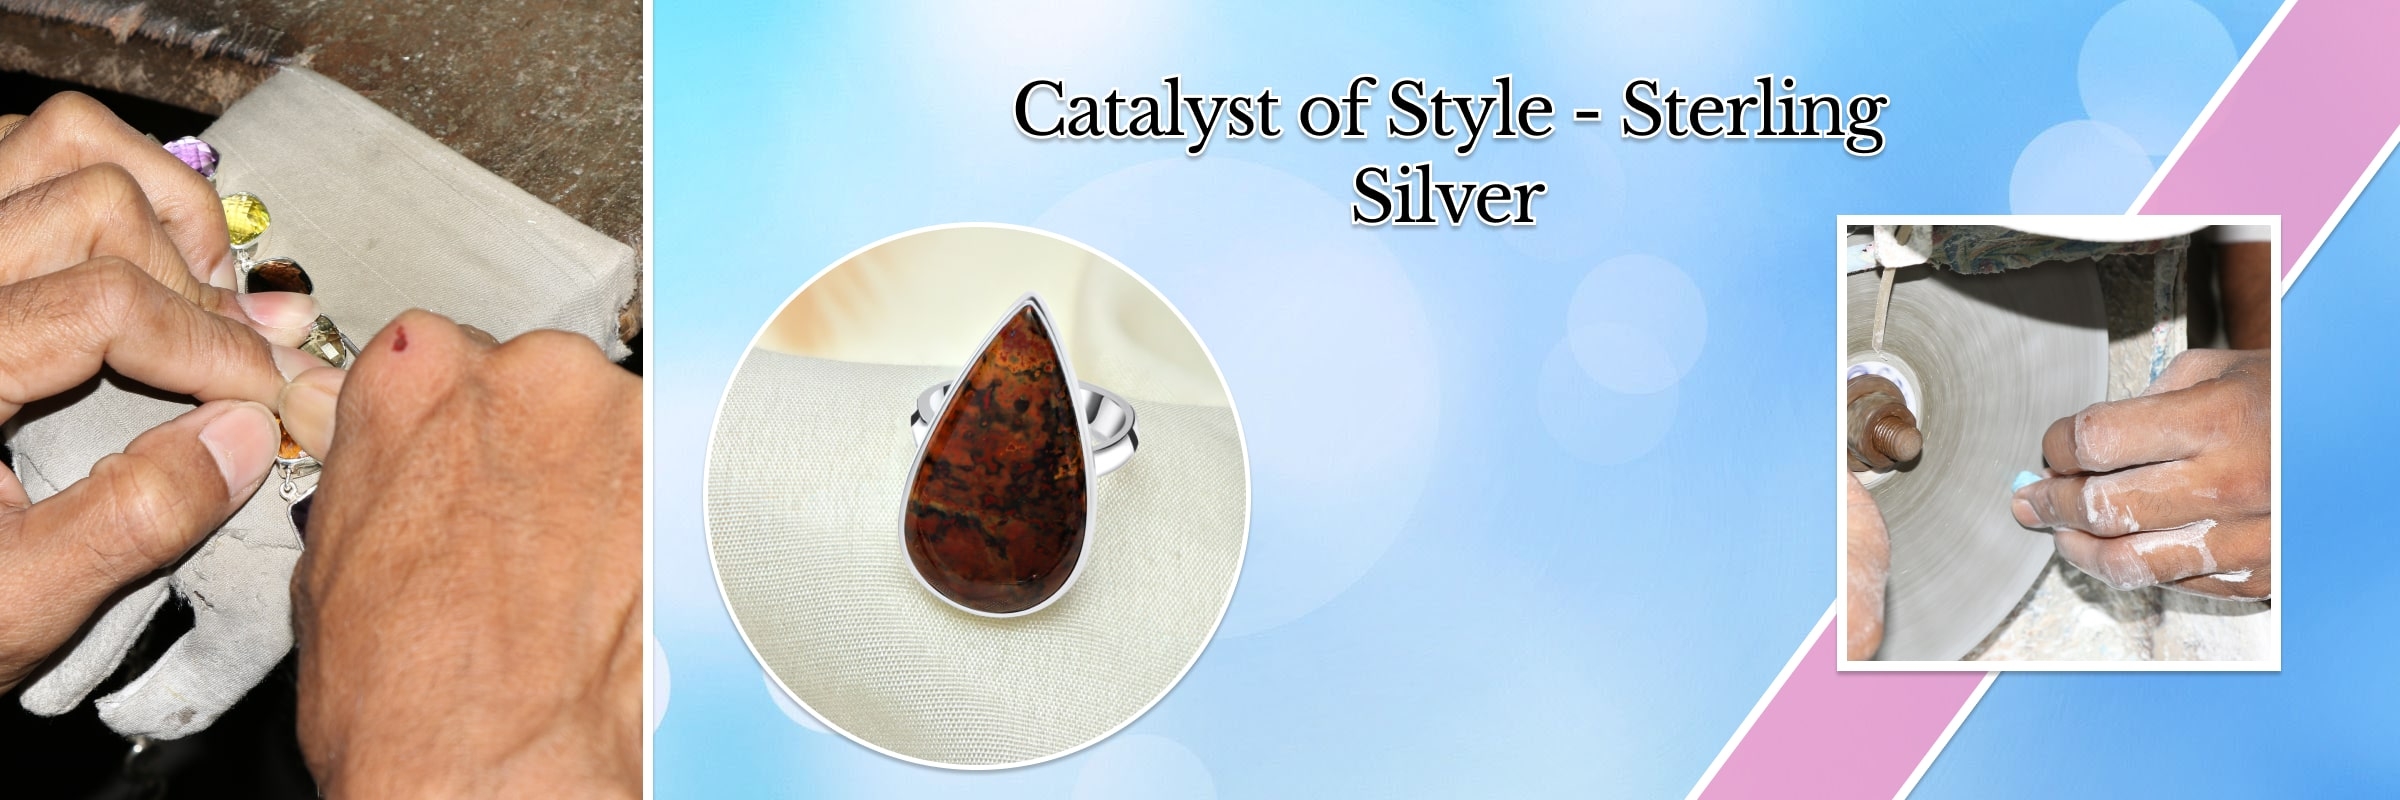 Sterling Silver's Catalytic Association